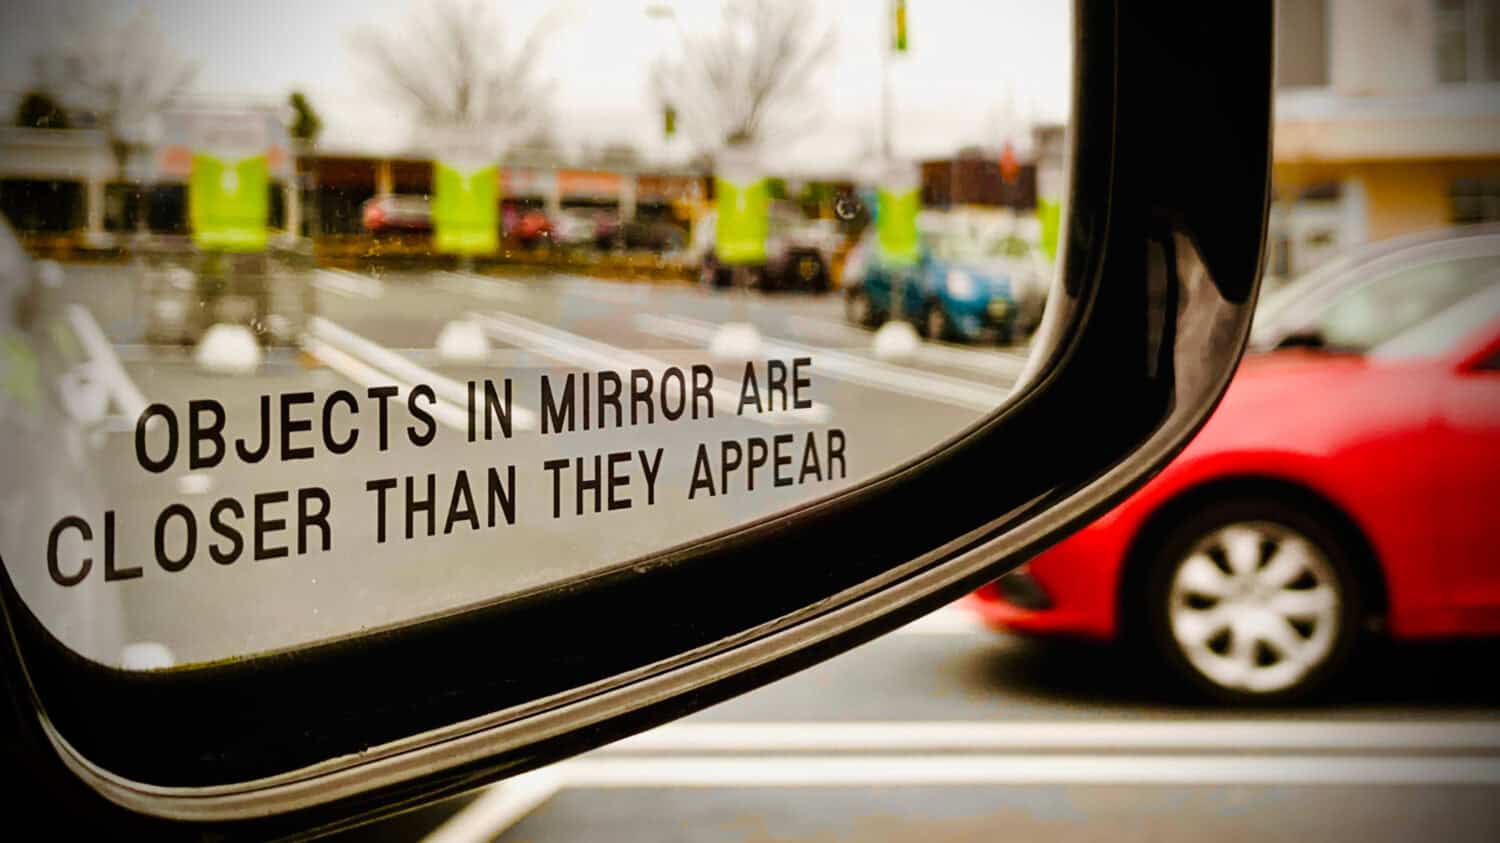 Car mirror saying “Objects In Mirror Are Closer Than They Appear” in Supermarket Parking Lot